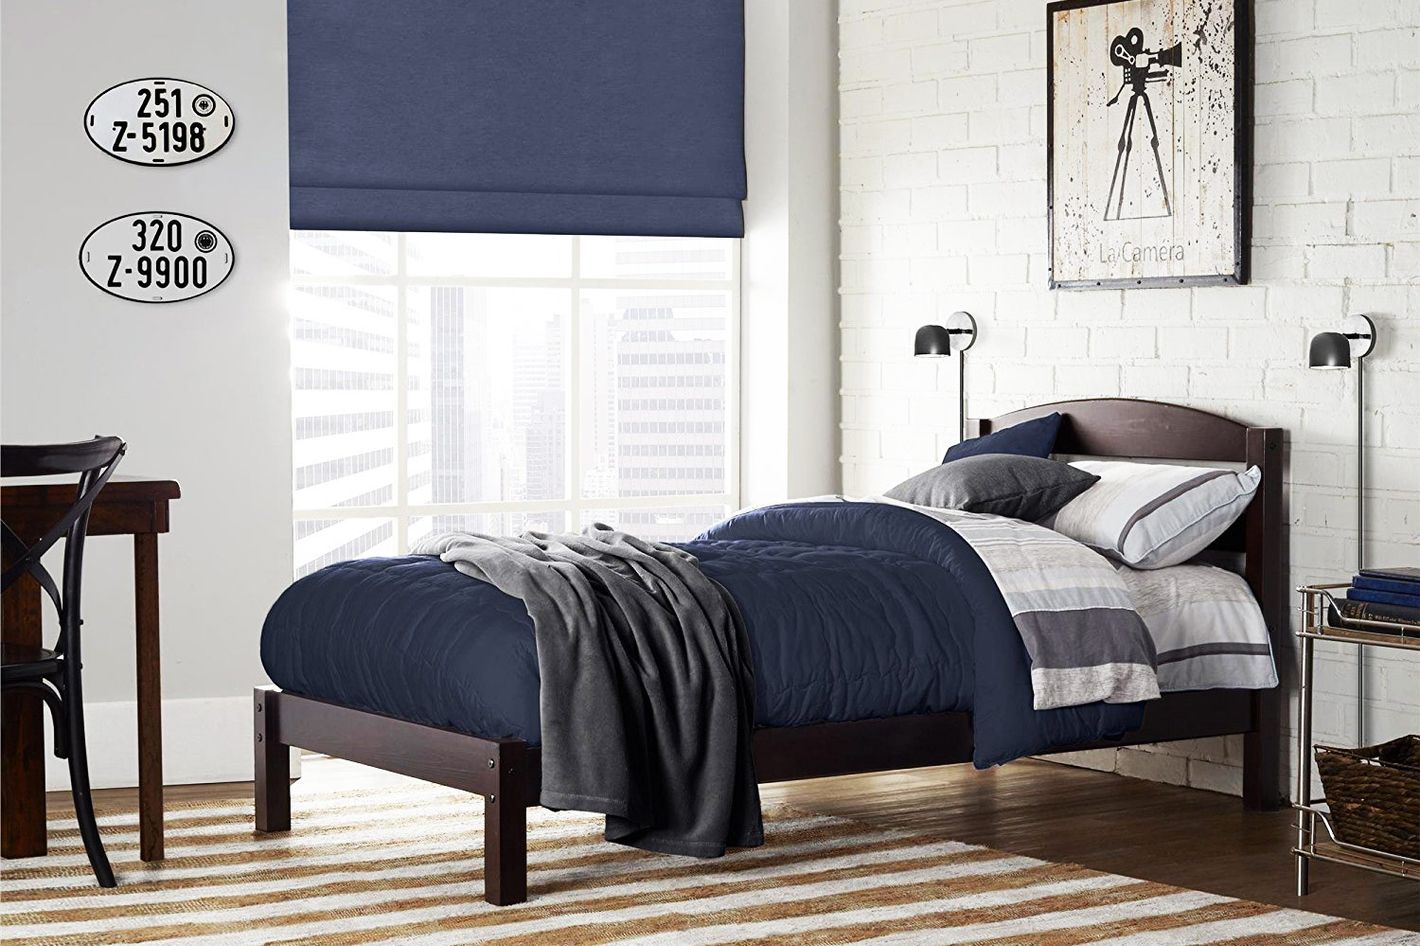 12 Best Twin Beds For Kids 2019, Twin Beds That Are Low To The Ground